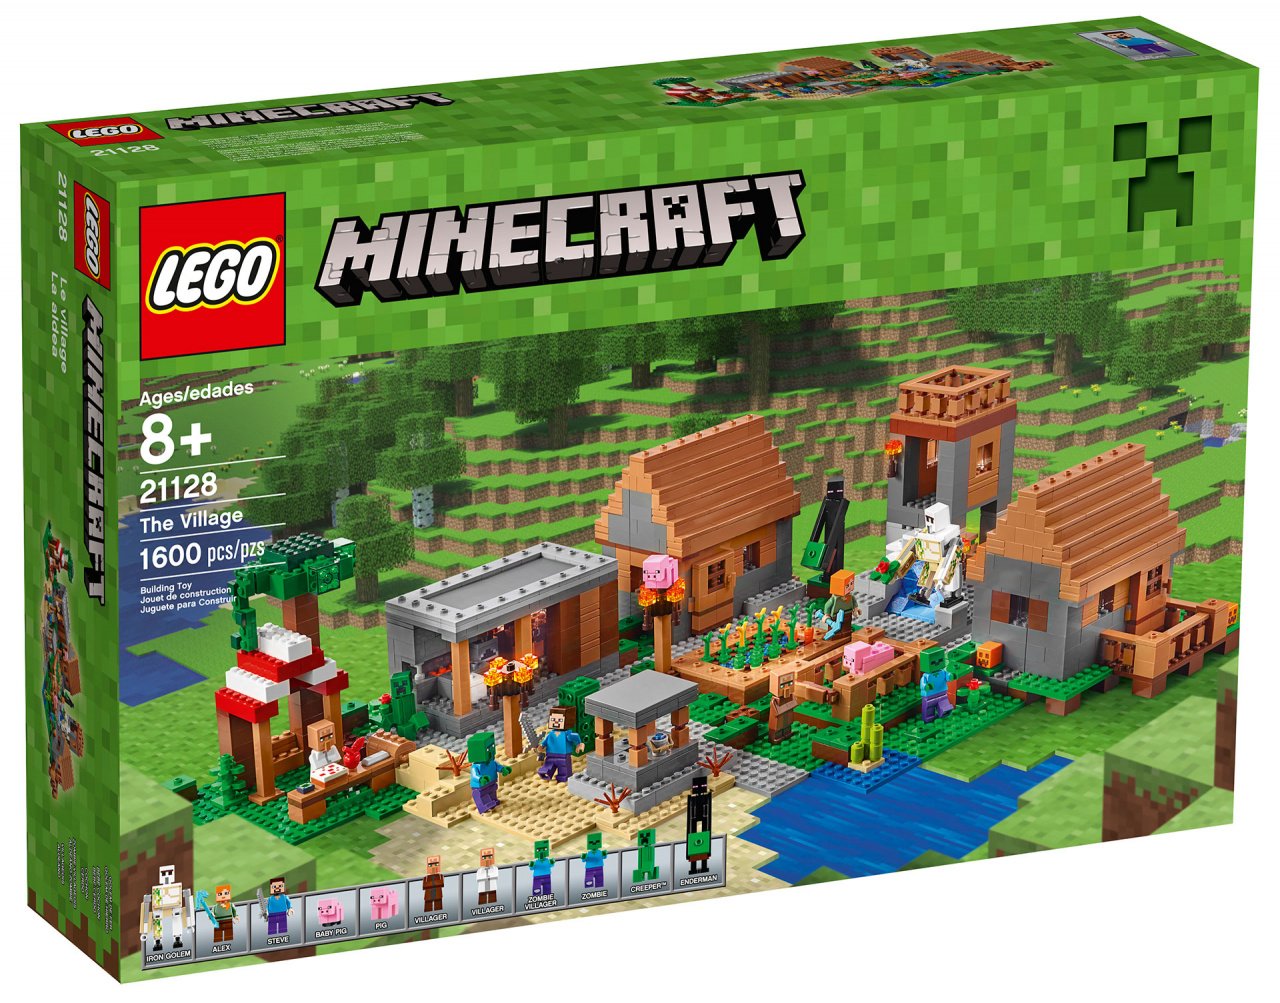 You'll Need To Dig Deep For This Insane Lego Minecraft Set